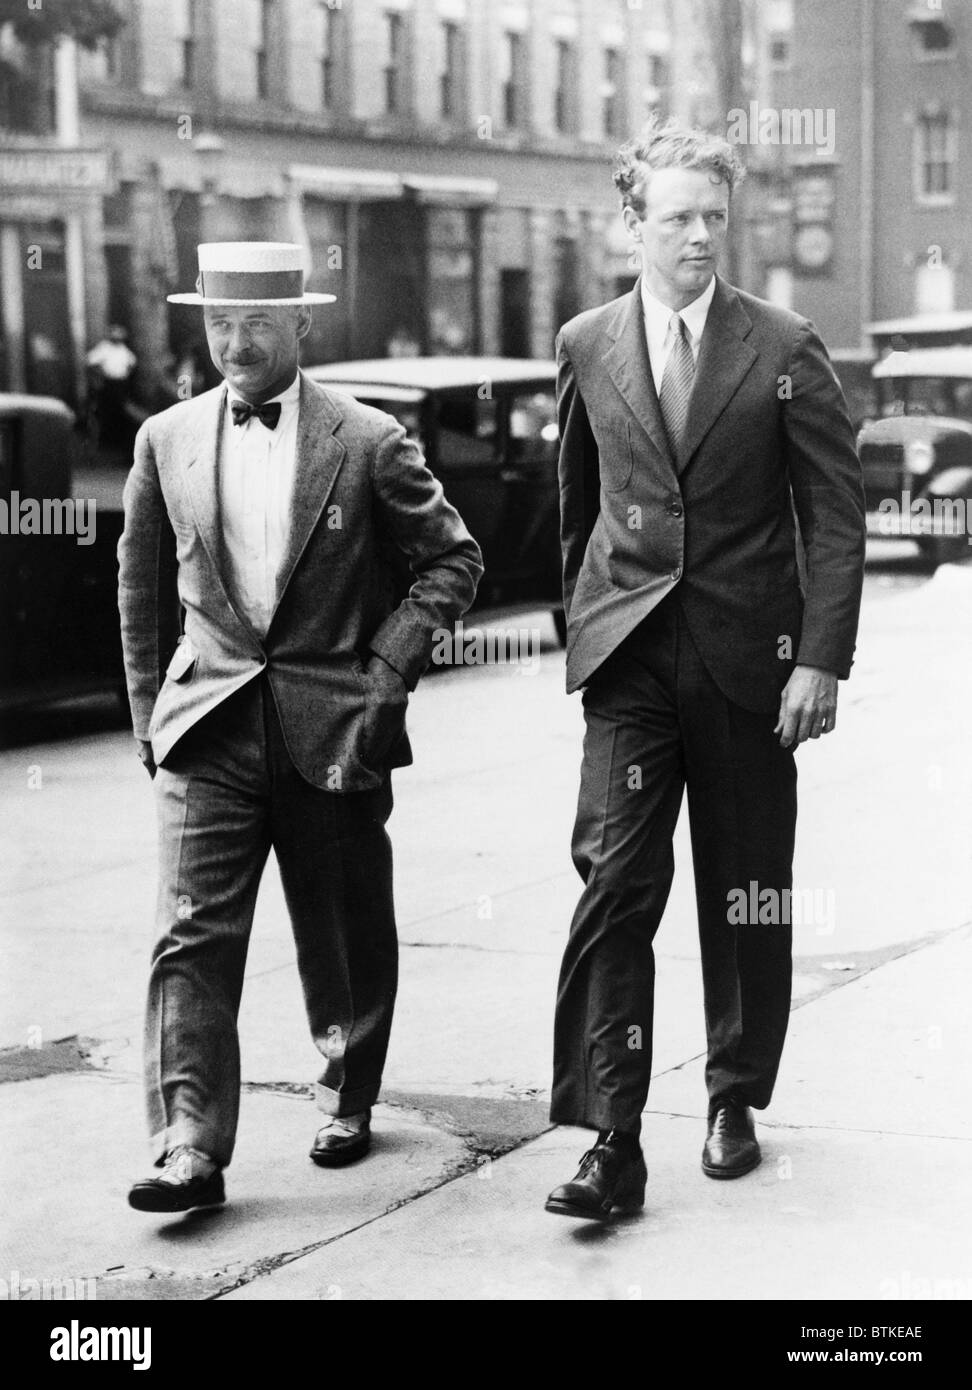 Charles A. Lindbergh and New Jersey State Police head, Colonel Schwarzkopf, at the courthouse at Flemington, N.J., for the trial of John Hughes Curtis who falsely claimed to have contact with the Lindbergh baby kidnappers in 1932. Stock Photo